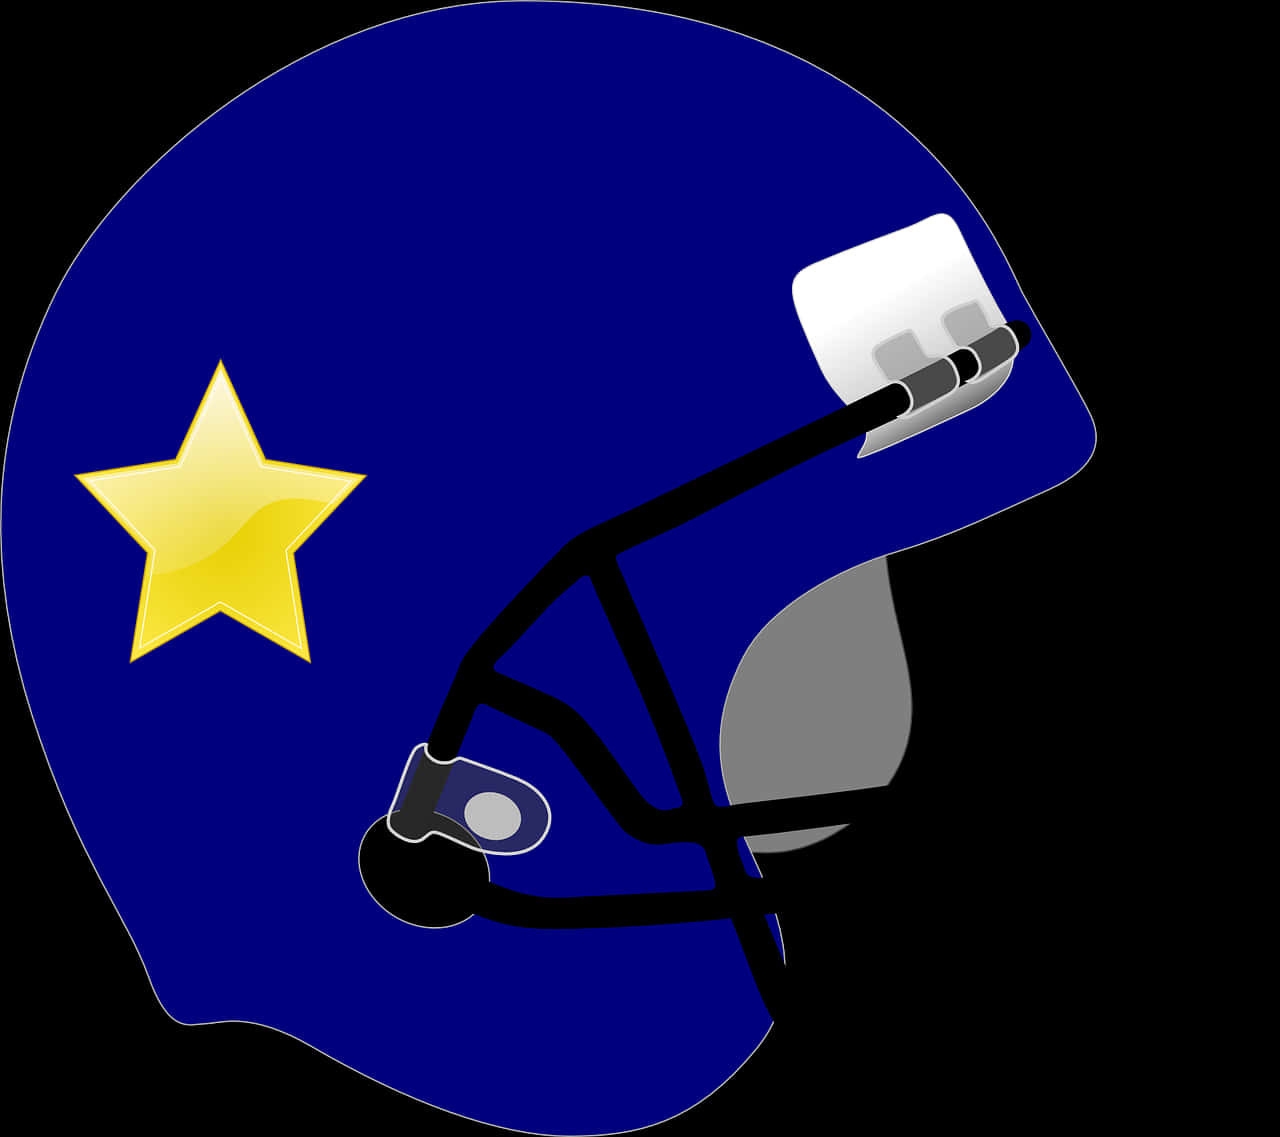 A Blue Football Helmet With A Yellow Star On It